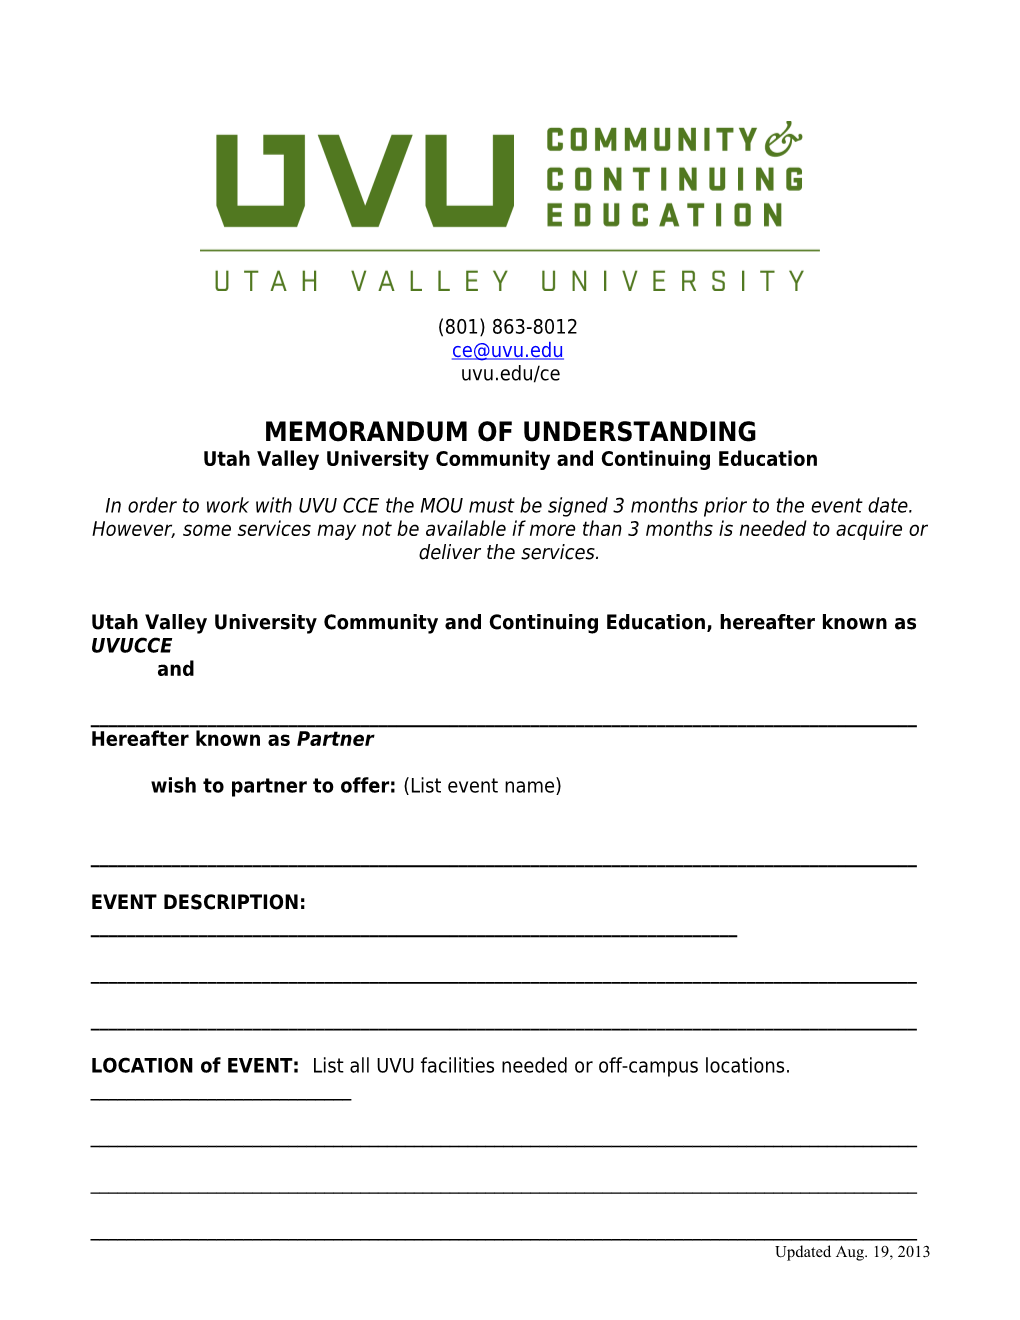 Utah Valley University Community and Continuing Education